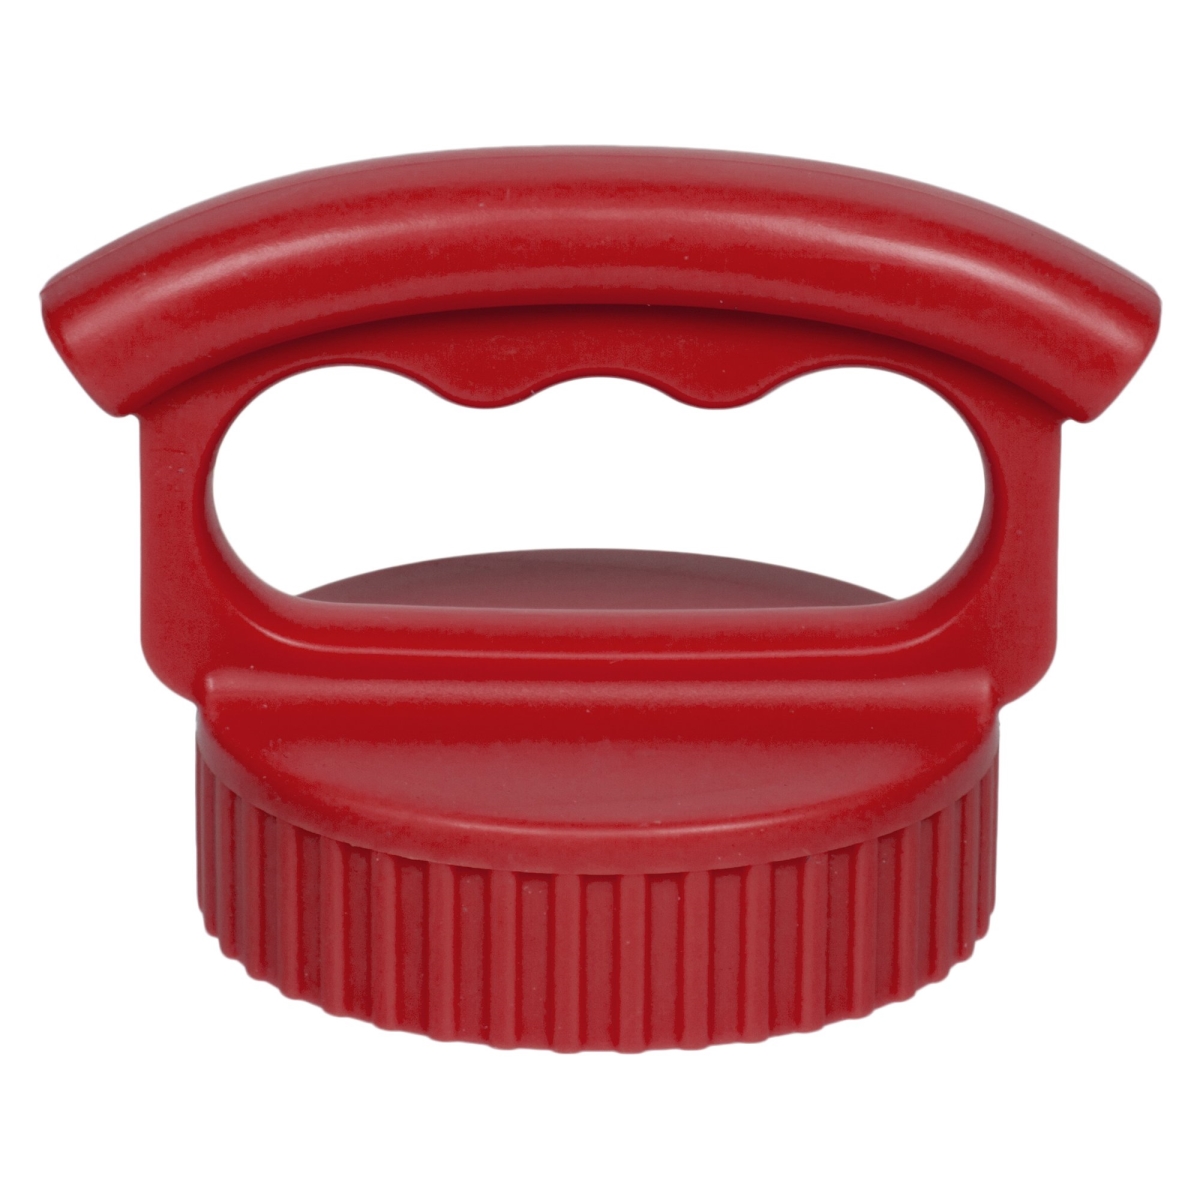 A45003rd0 Fifty & Fifty 3 Finger Caps, Cherry Red